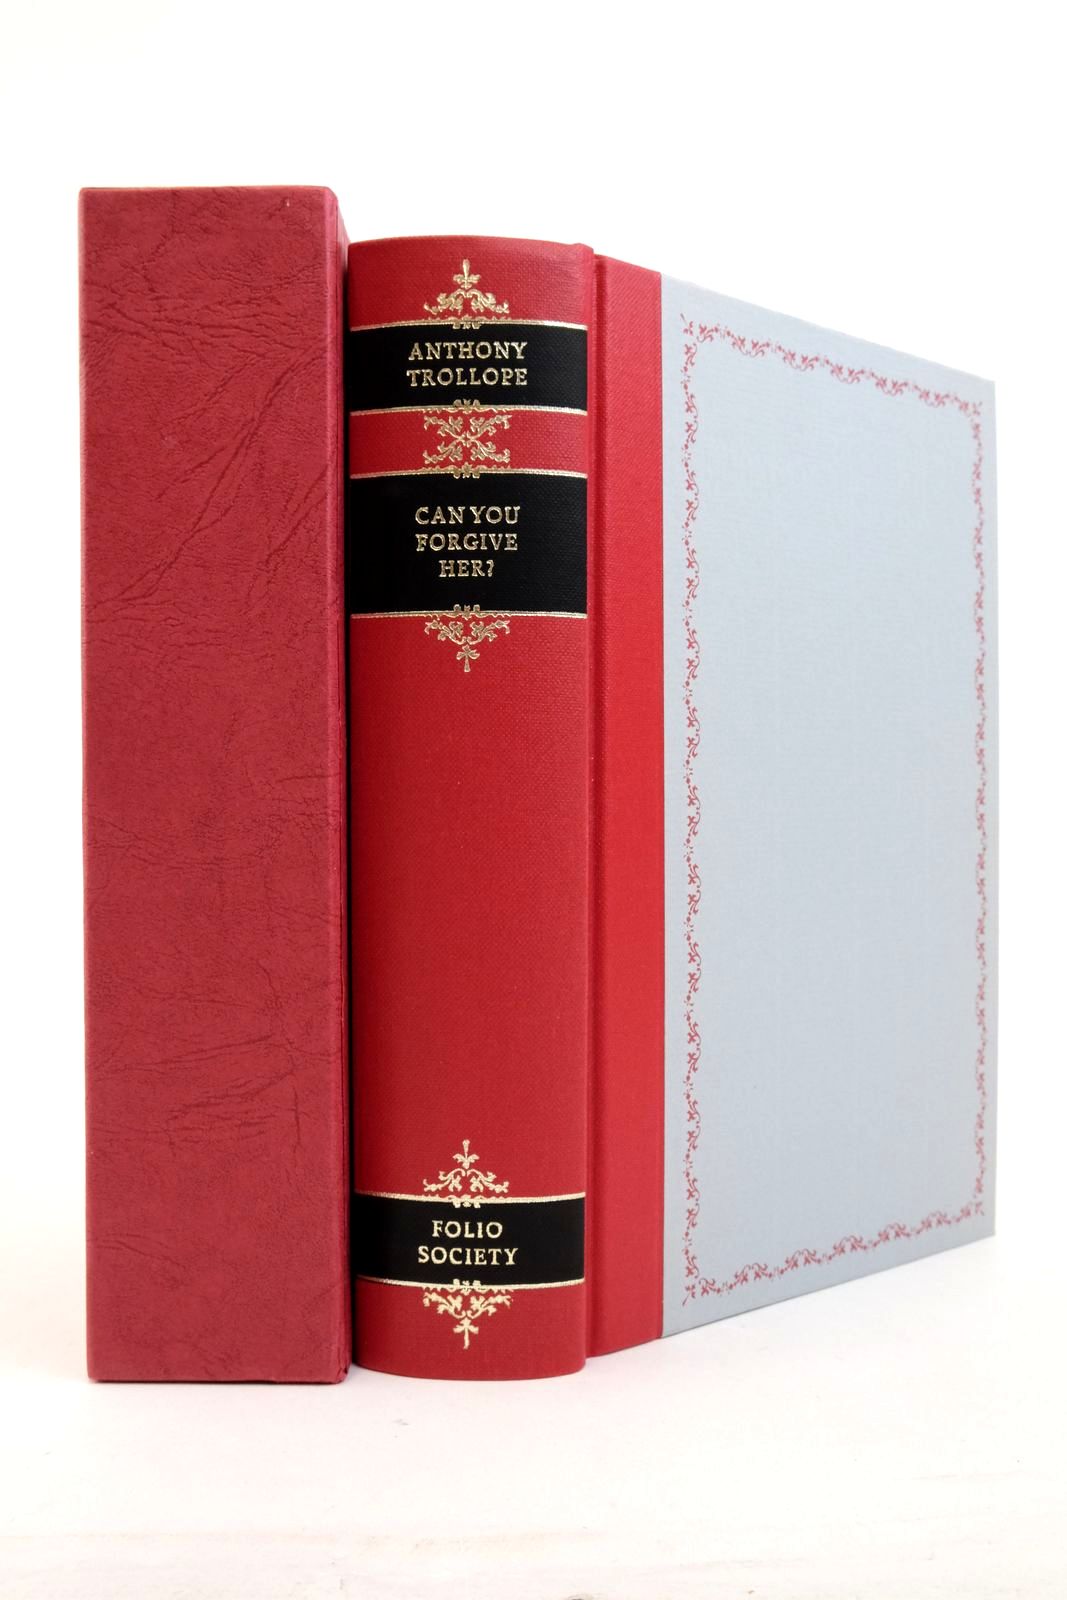 Photo of CAN YOU FORGIVE HER? written by Trollope, Anthony Skilton, David illustrated by Thomas, Llewellyn published by Folio Society (STOCK CODE: 2138242)  for sale by Stella & Rose's Books